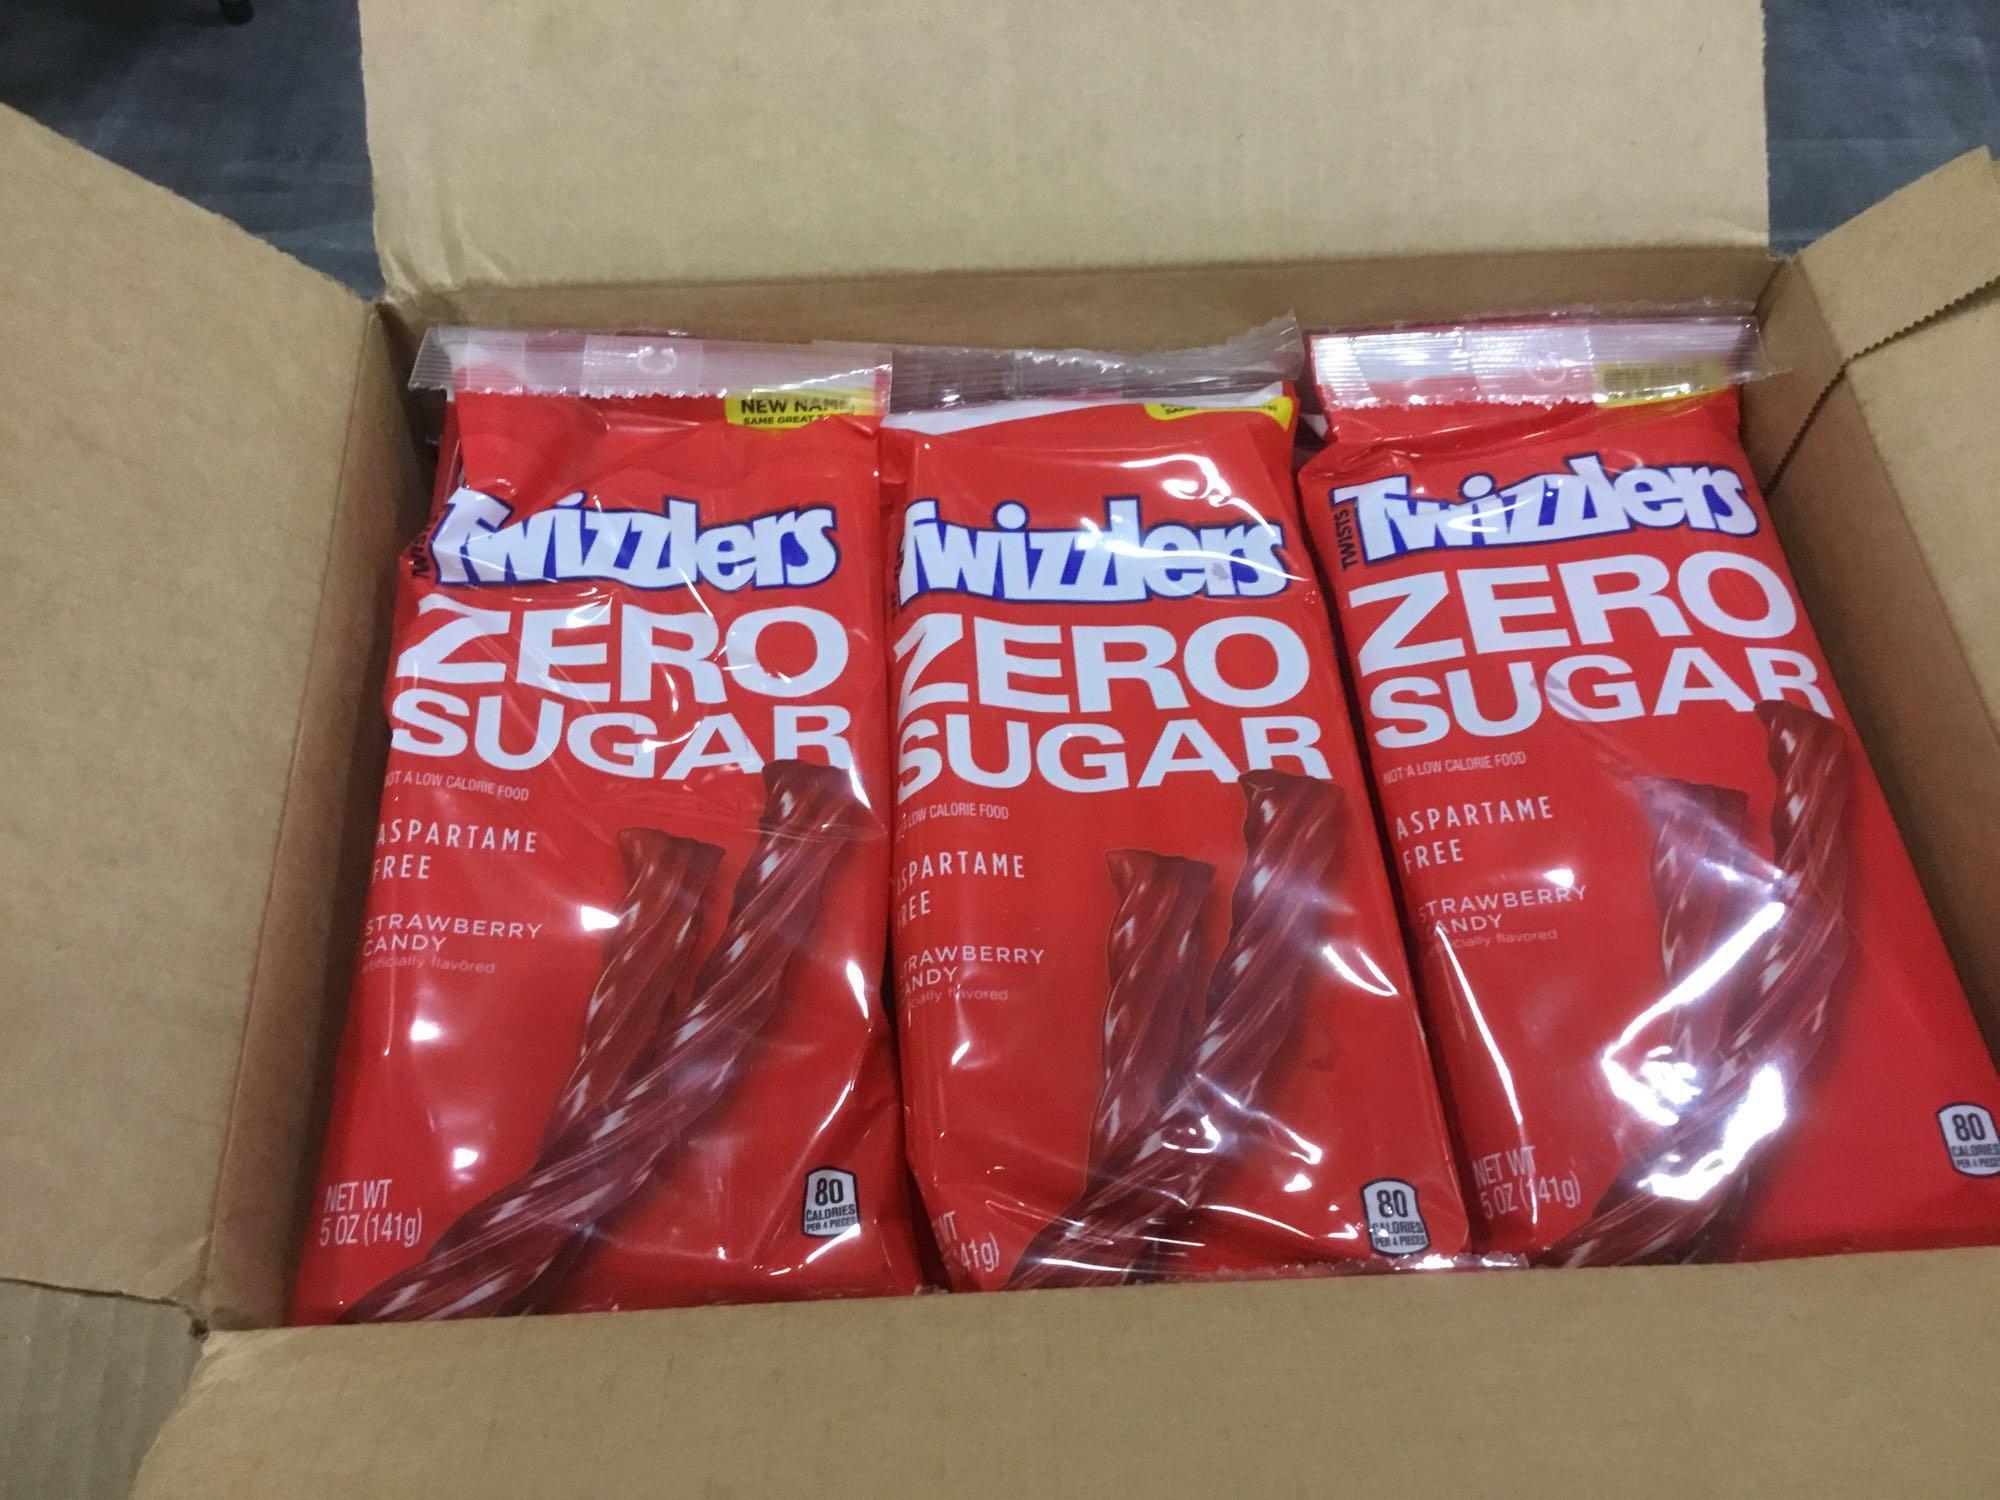 TWIZZLERS Strawberry Licorice Sugar Free Candy, 5 Oz, Bag, (12 Count) - $24.40 MSRP